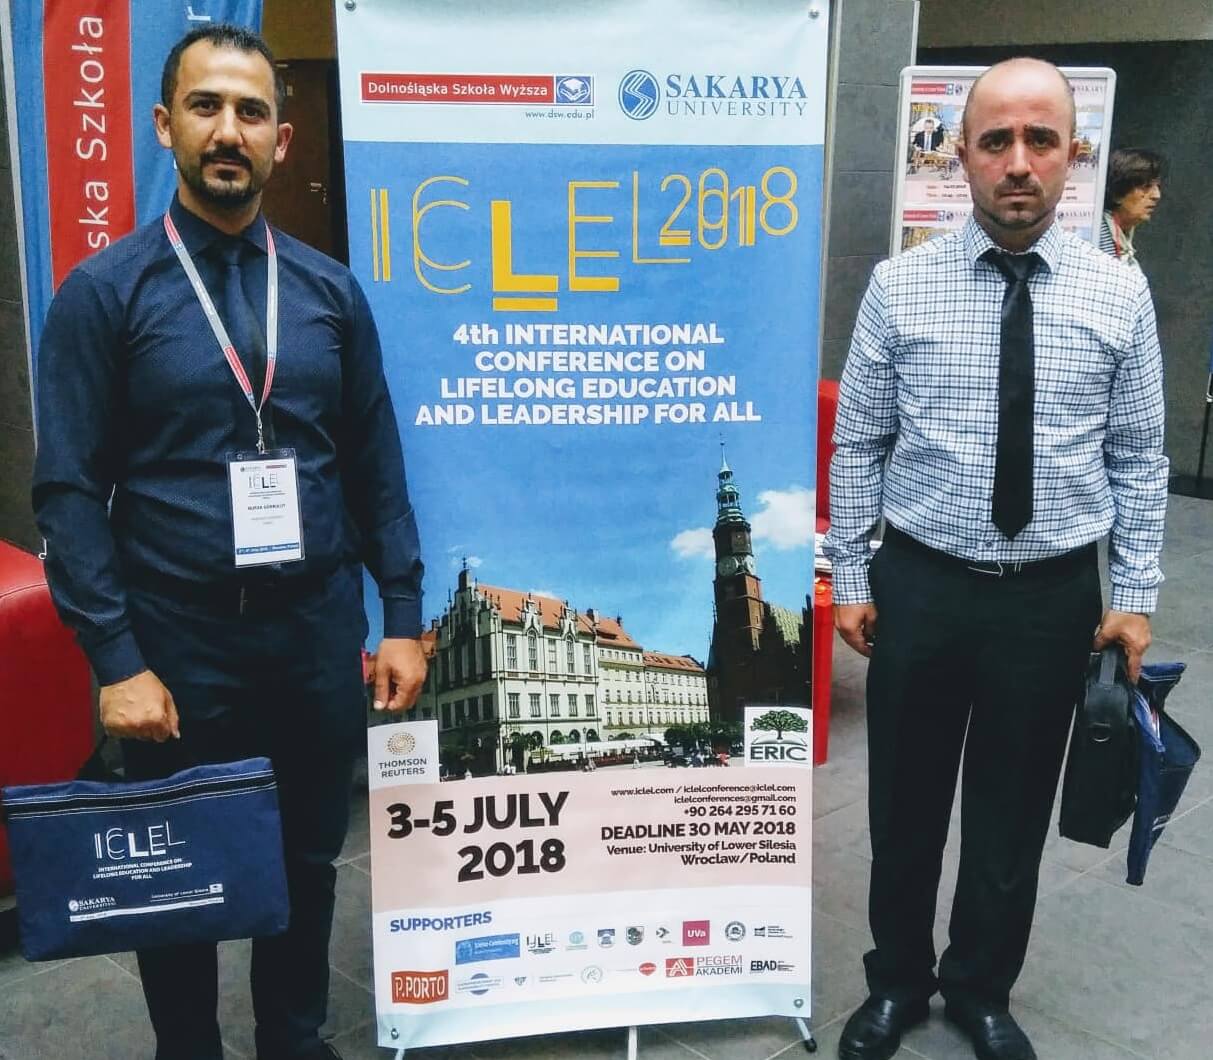 Near East University was represented at the 4th International Conference on Lifelong Education and Leadership for All, held in Poland